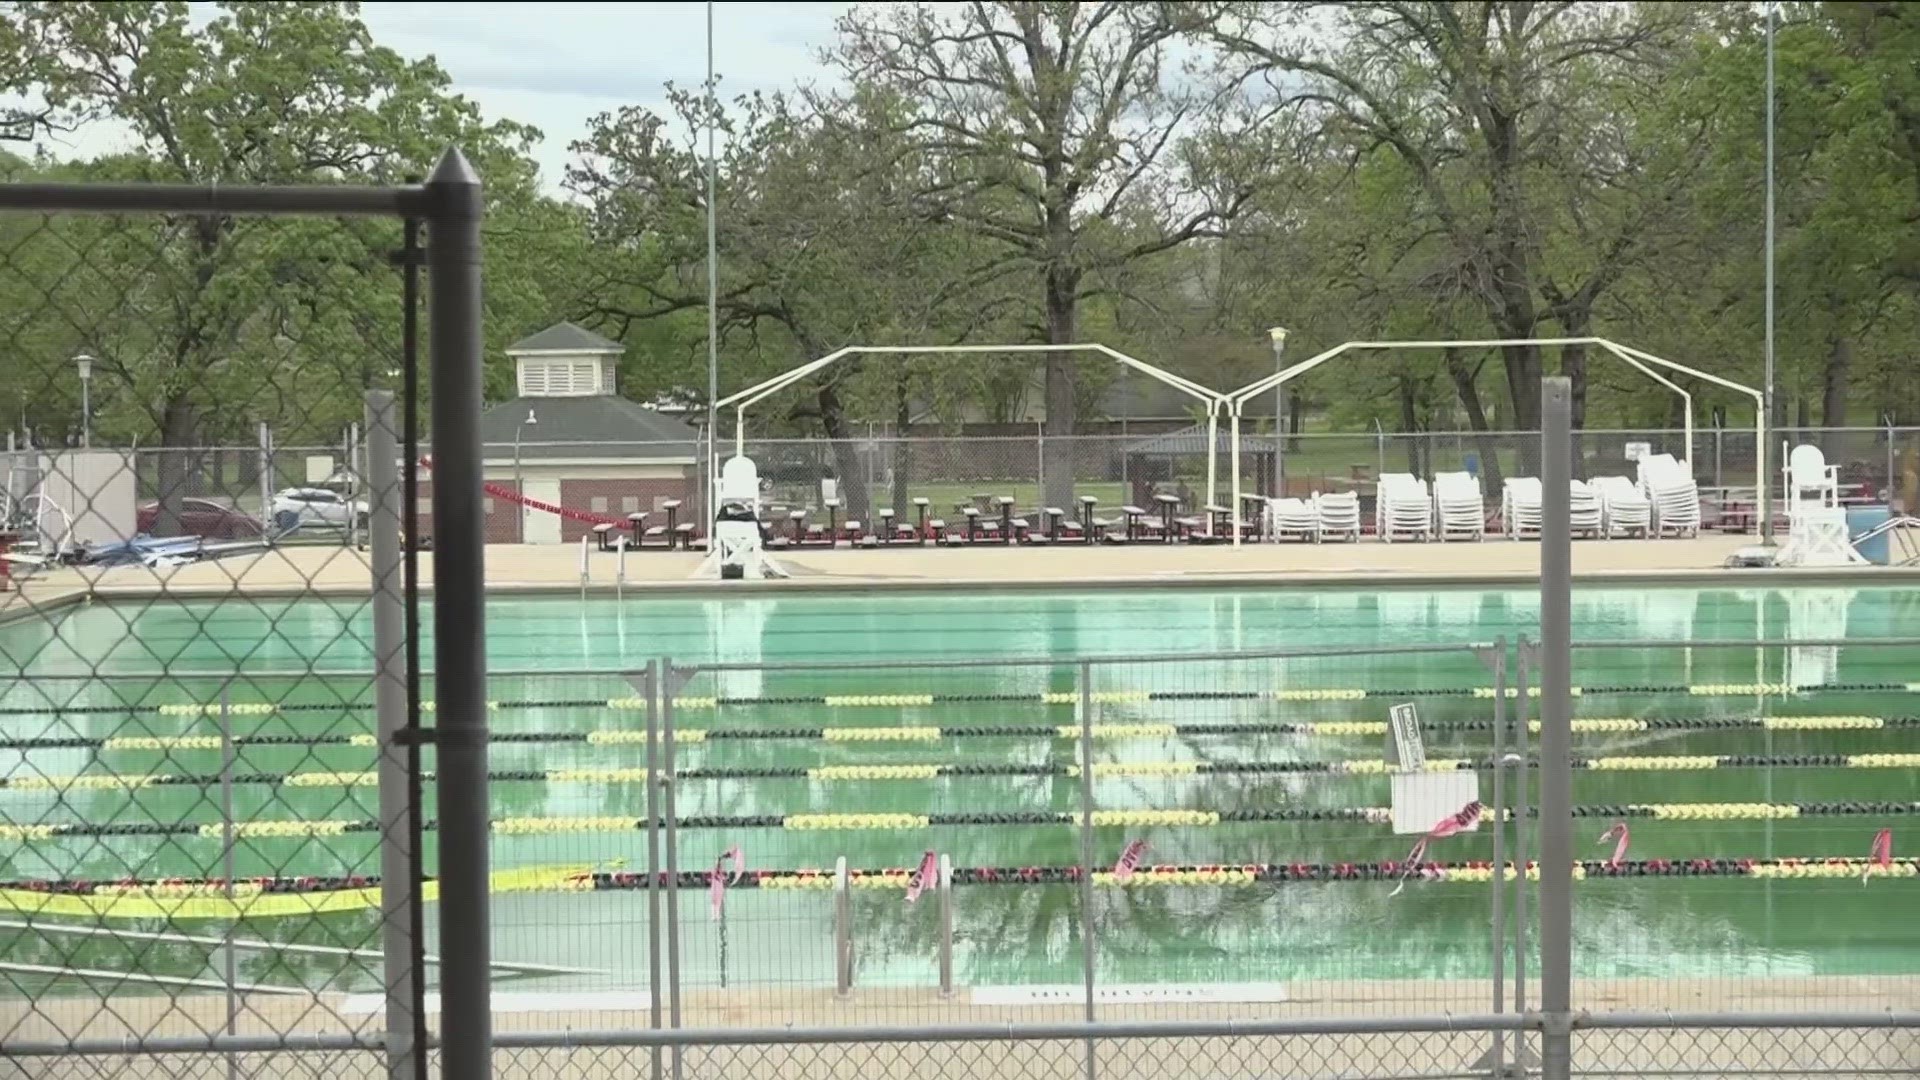 Construction crews will begin demolition on the 75-year-old bathhouse in preparation for a new bathhouse at Creekmore Park Pool.